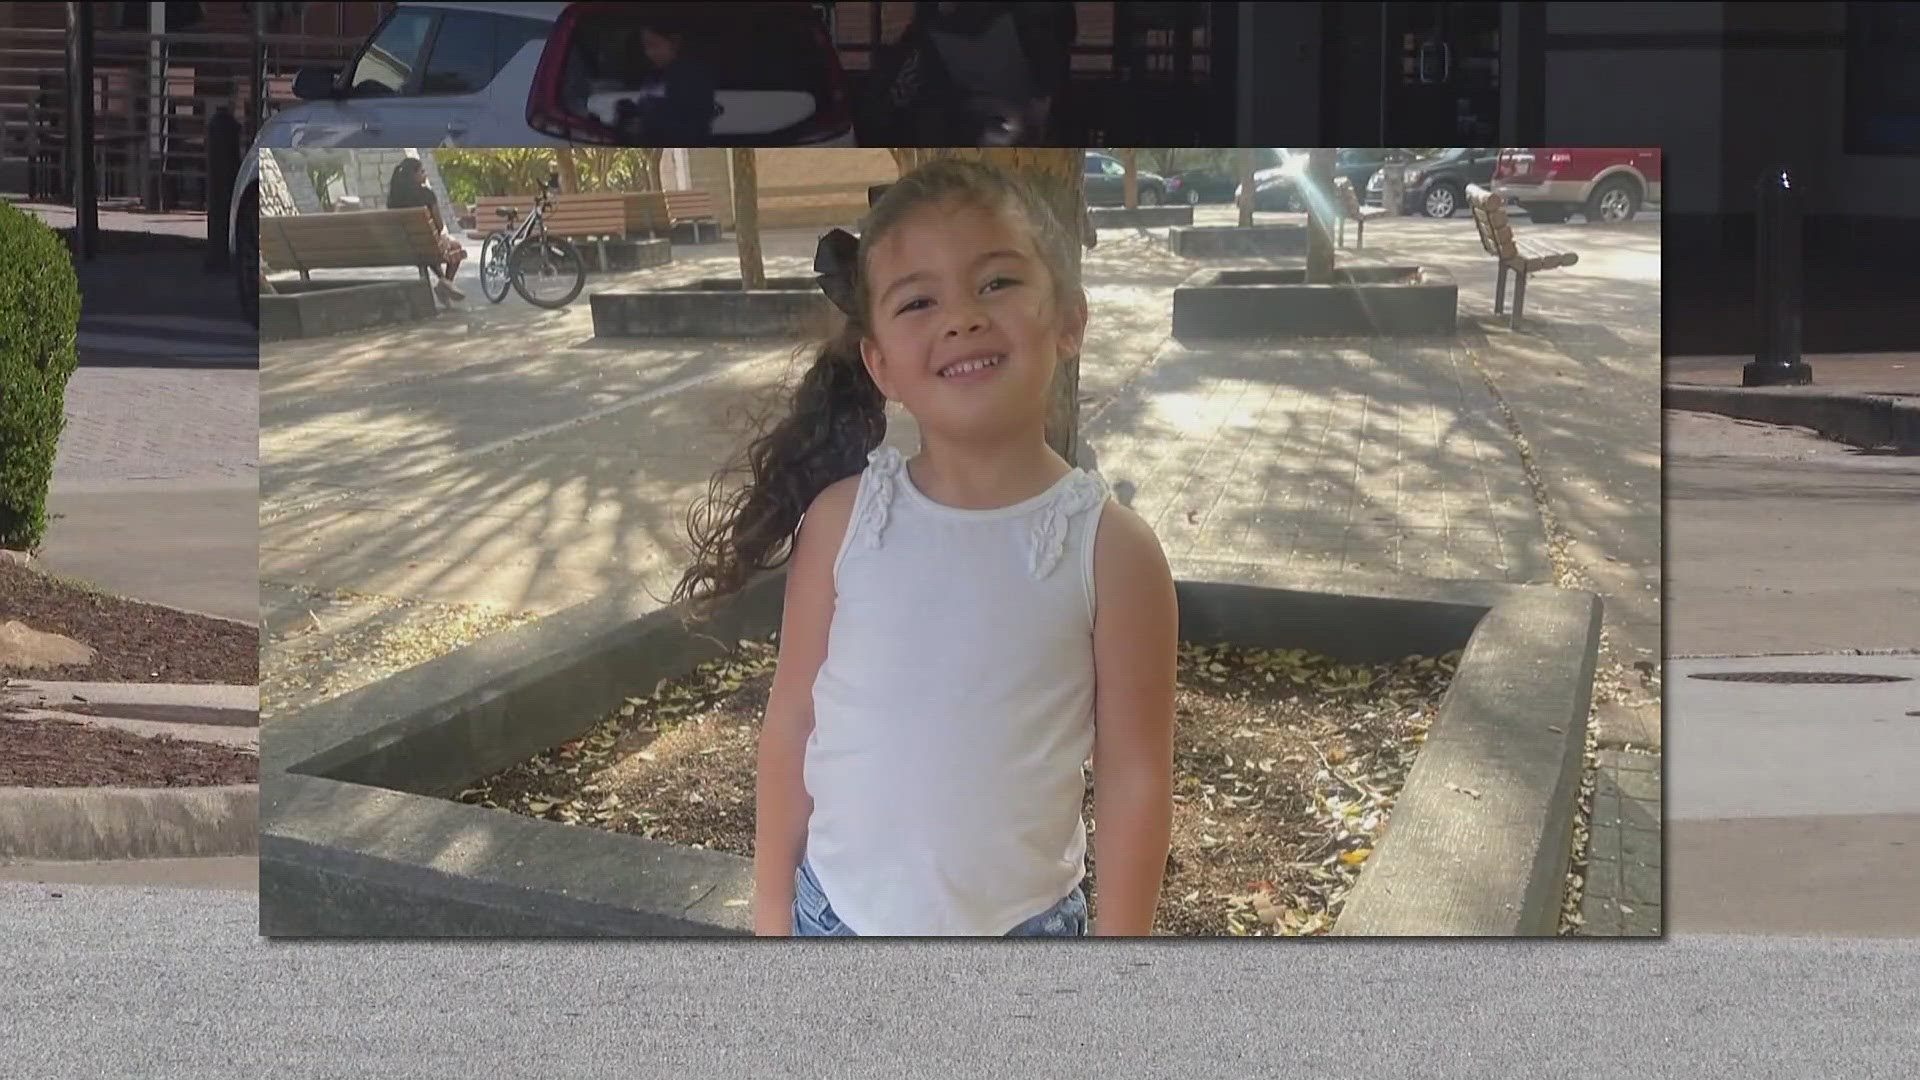 On March 10, Abigail was crossing Mall of Georgia Drive with her father and 7-year-old sister, when authorities said they were hit by an 18-year-old driver.